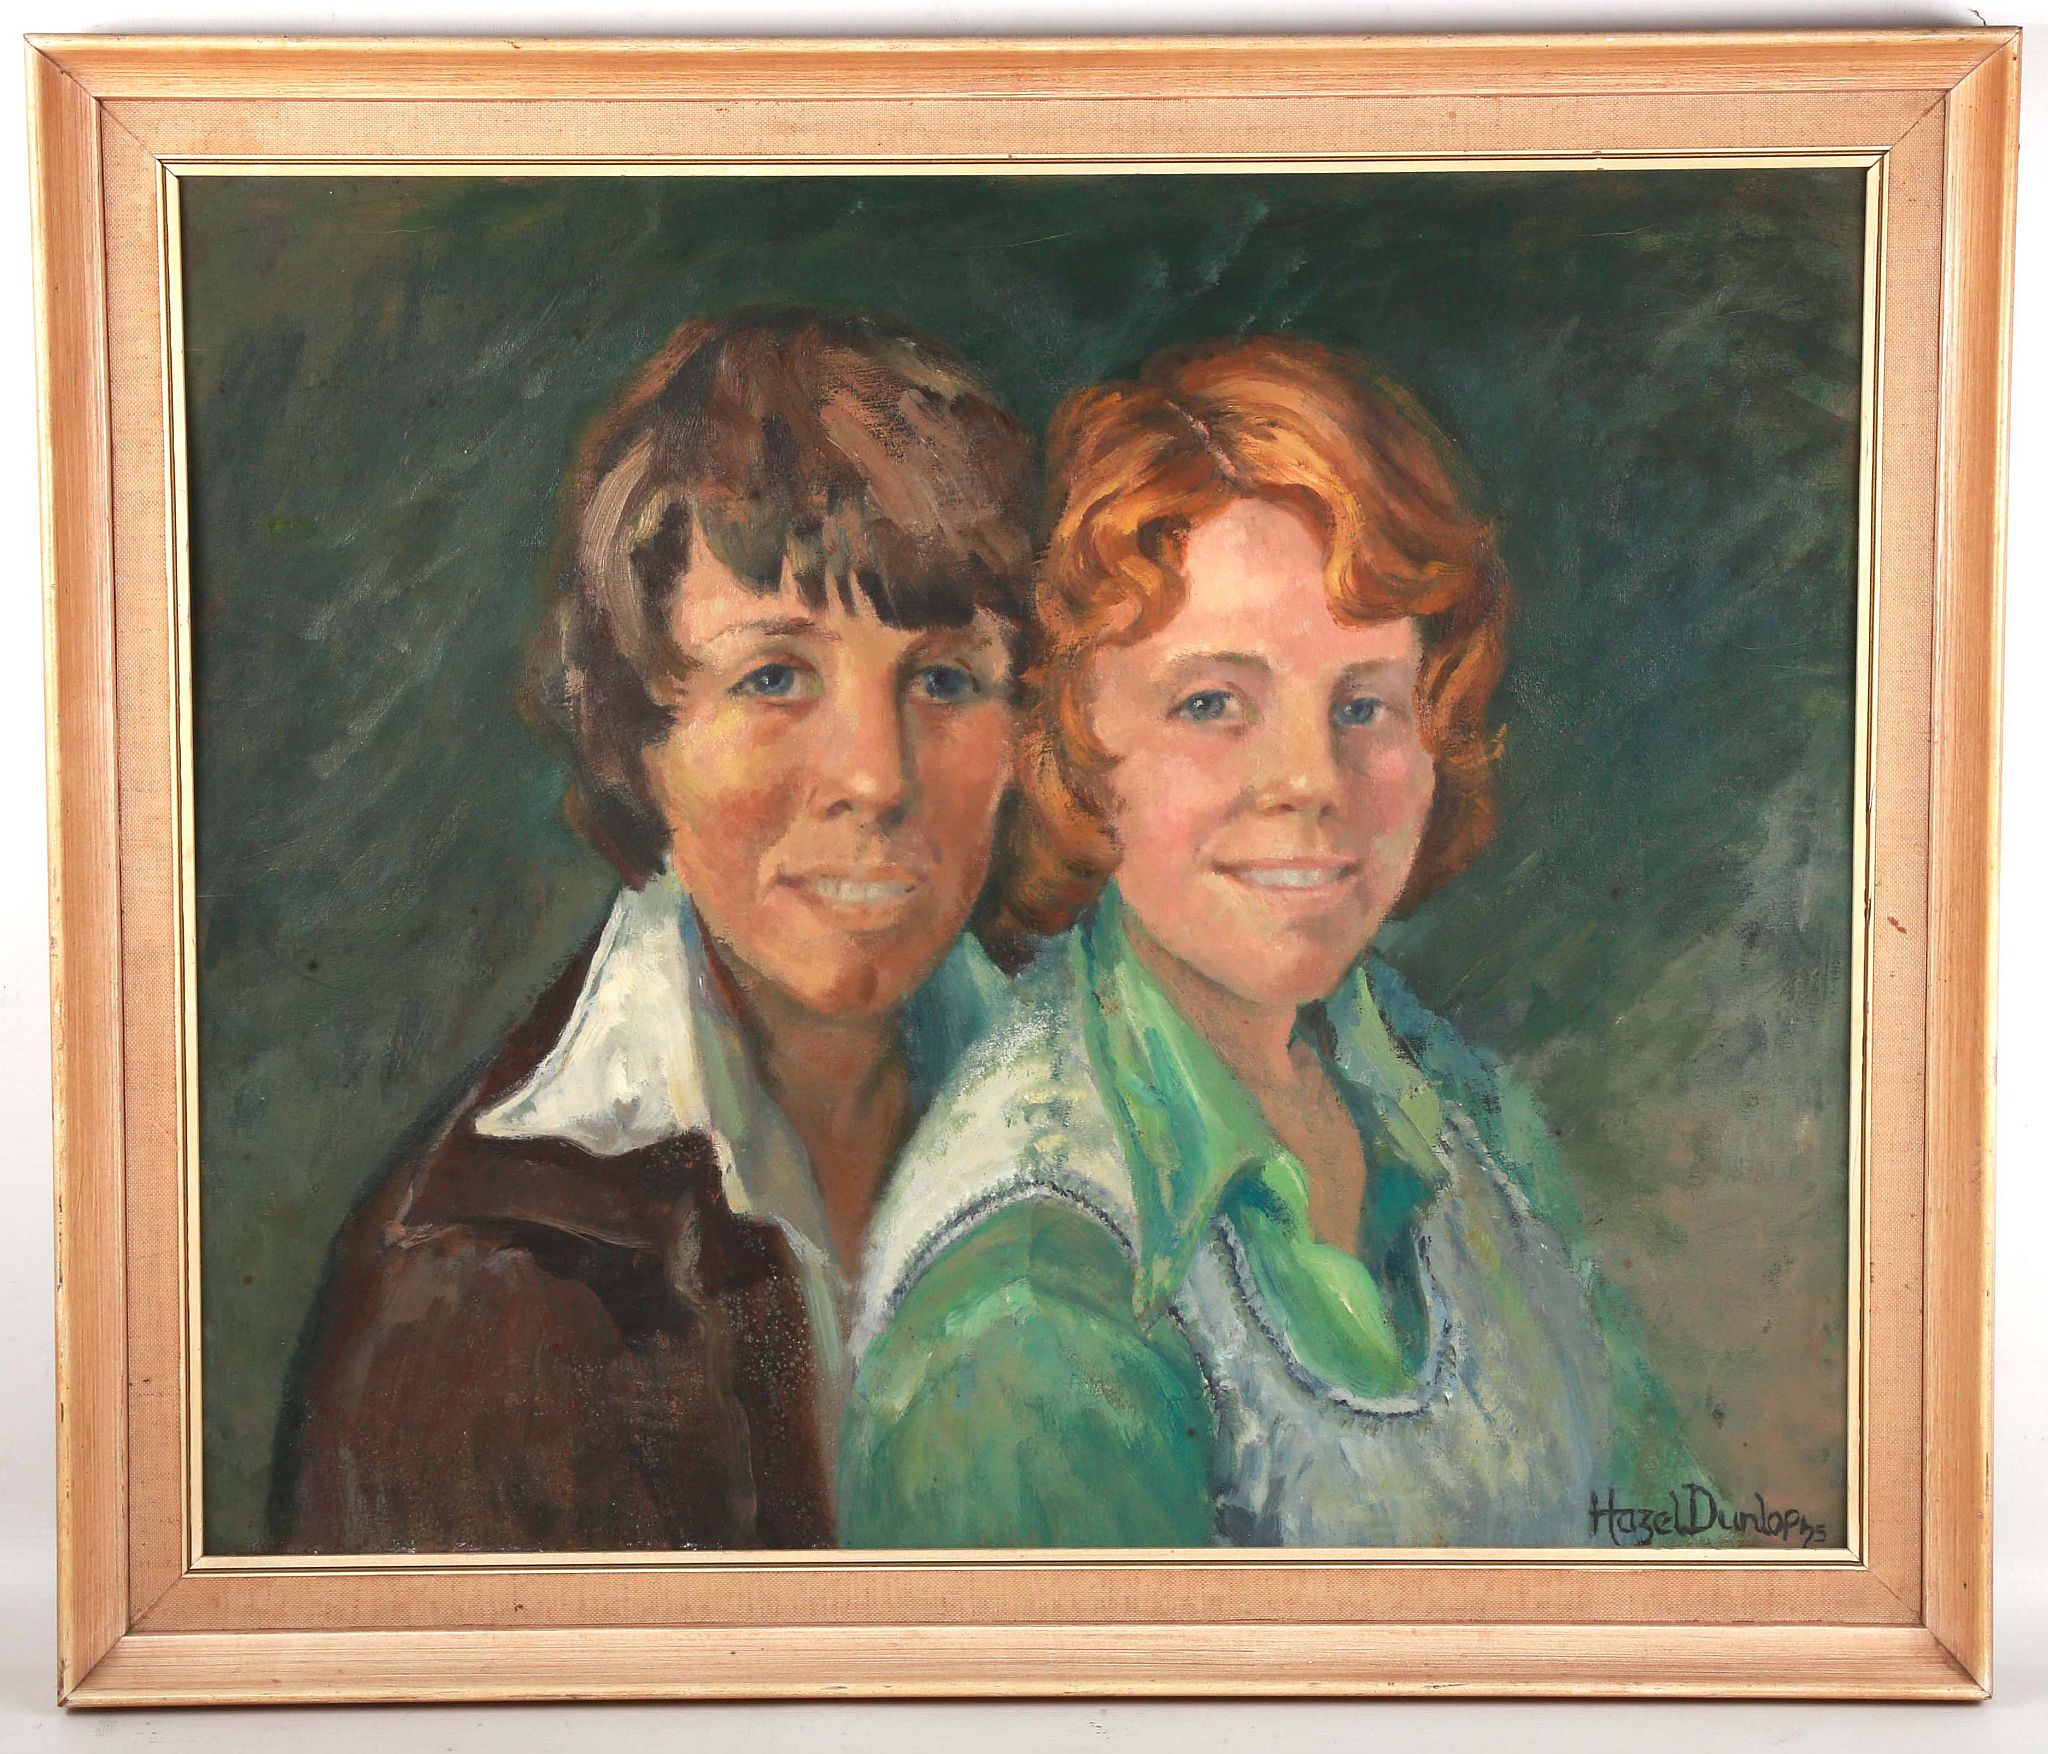 Hazel Dunlop, 20th Century British. 'A Family Portrait'. Oil on canvas board. Signed lower right and